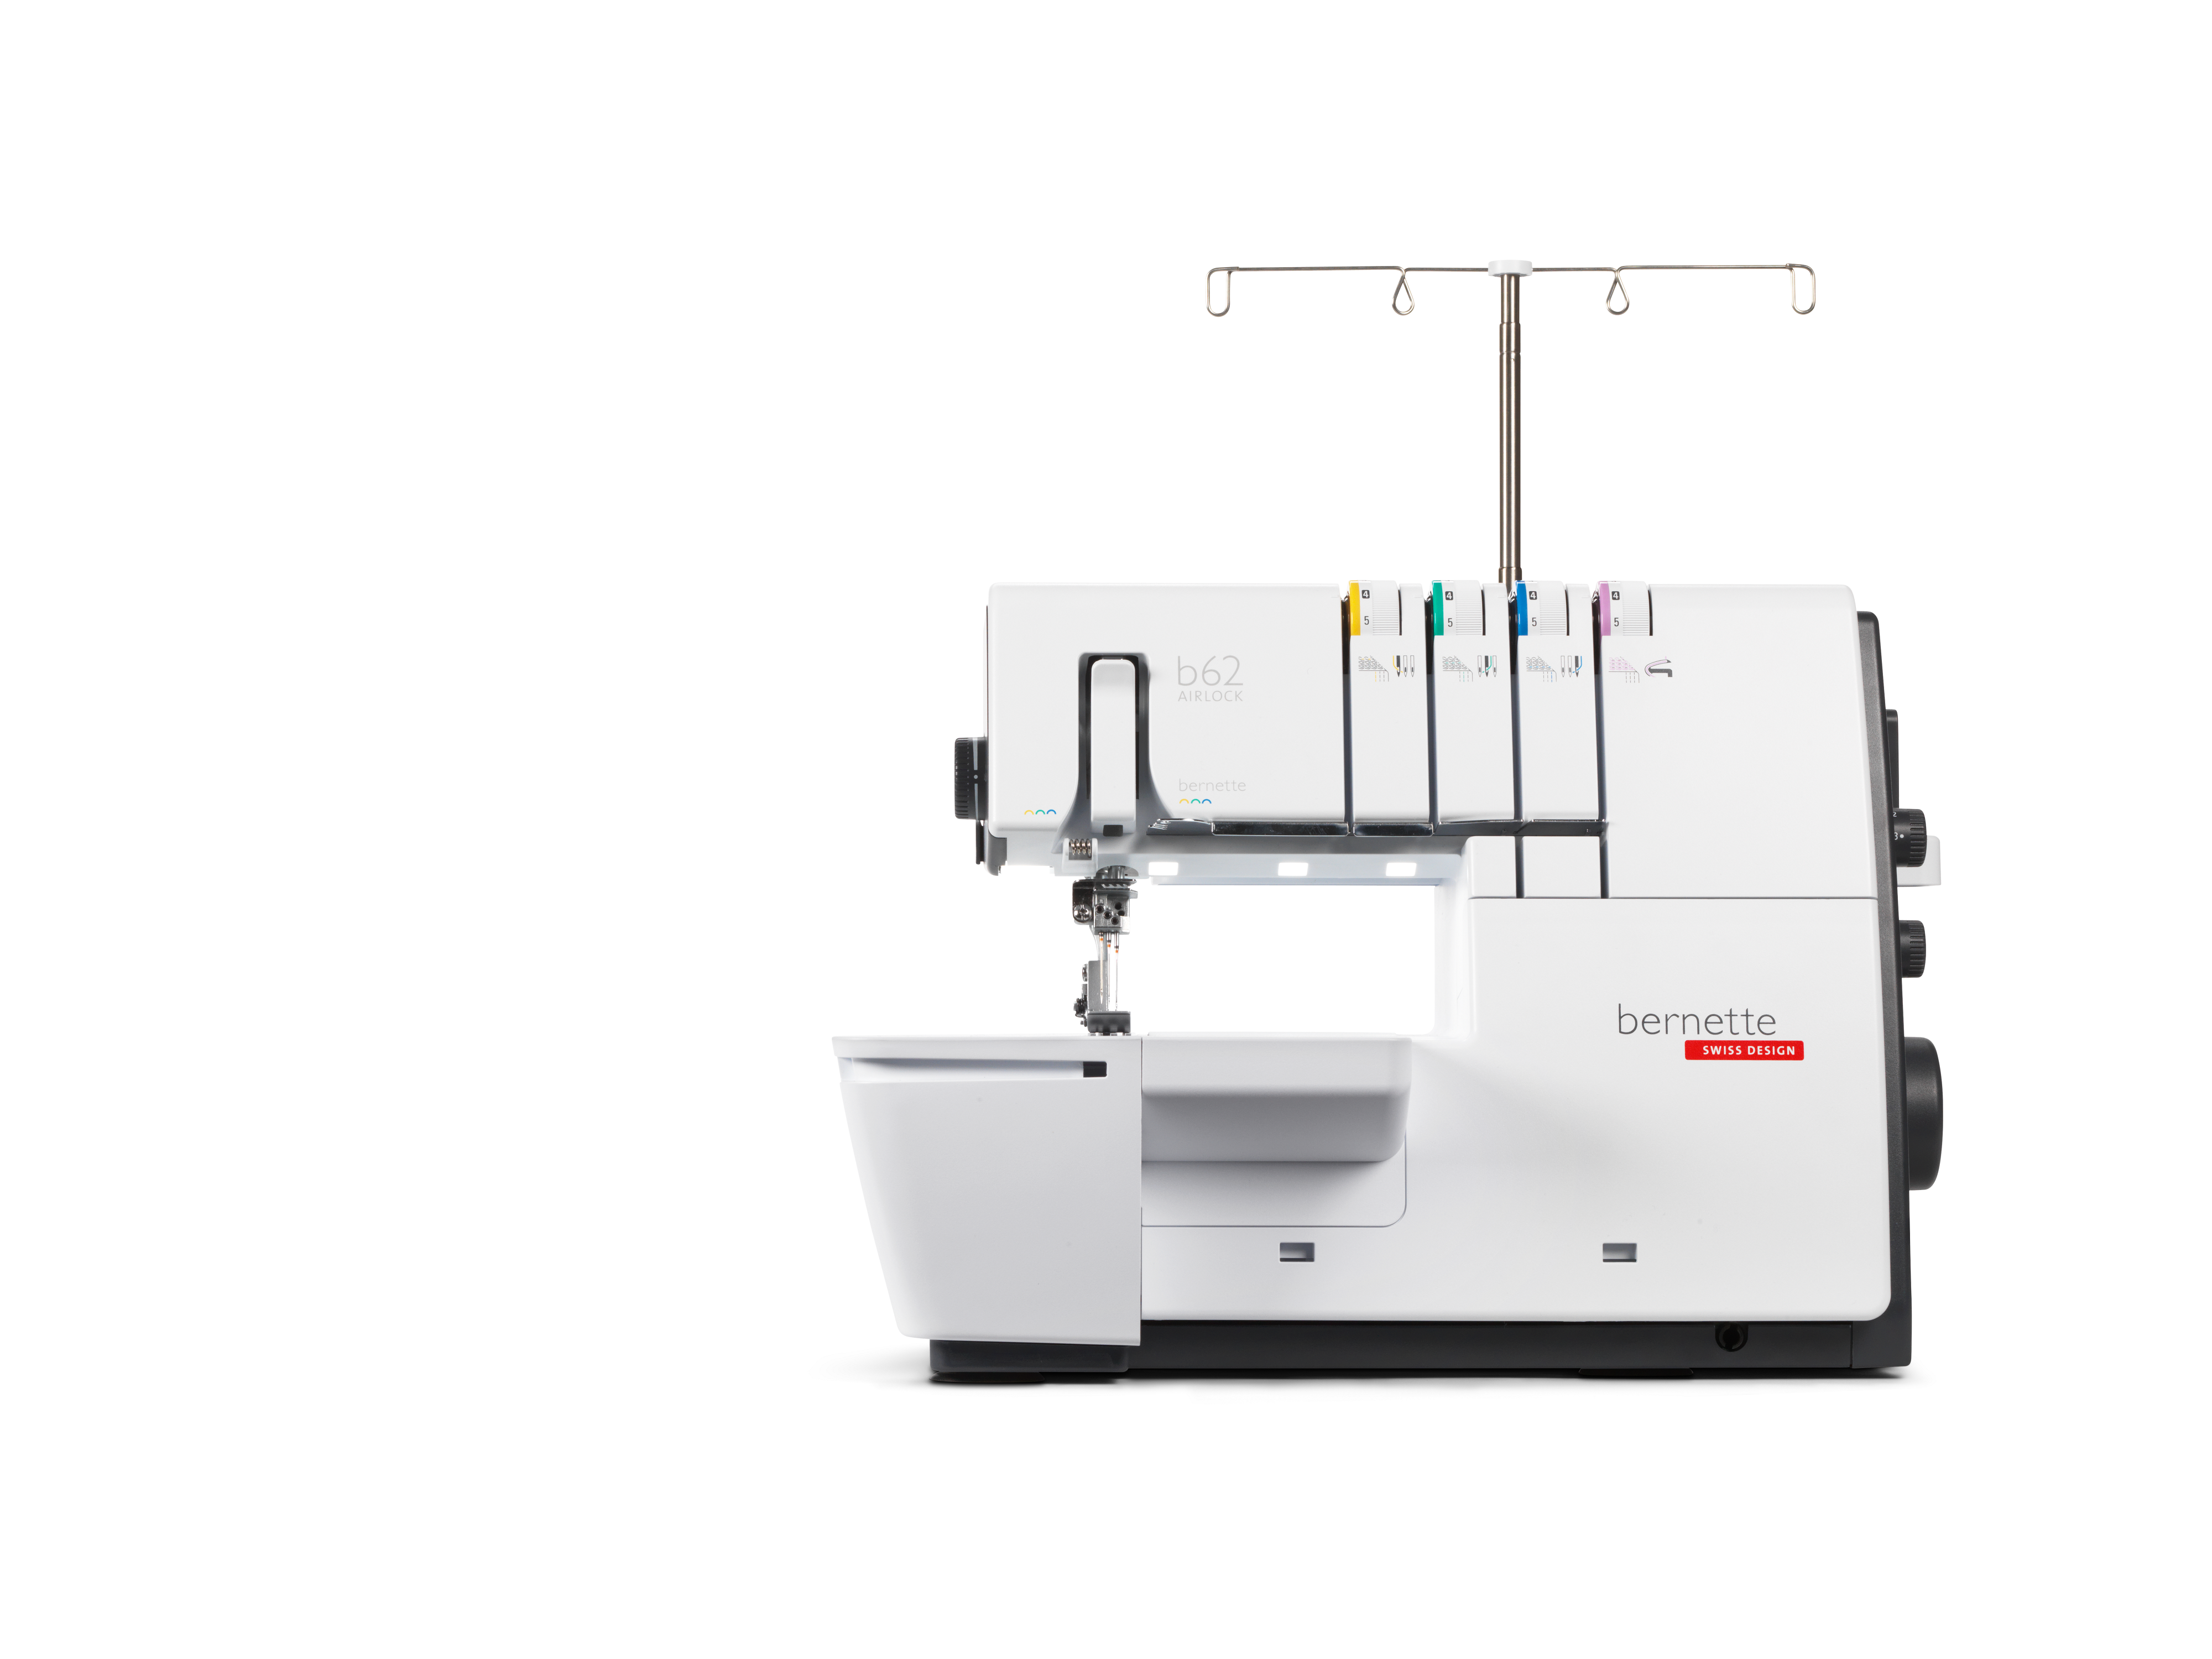 Bernette b62 AirLock Coverstitch Sewing Machine for Sale at World Weidner